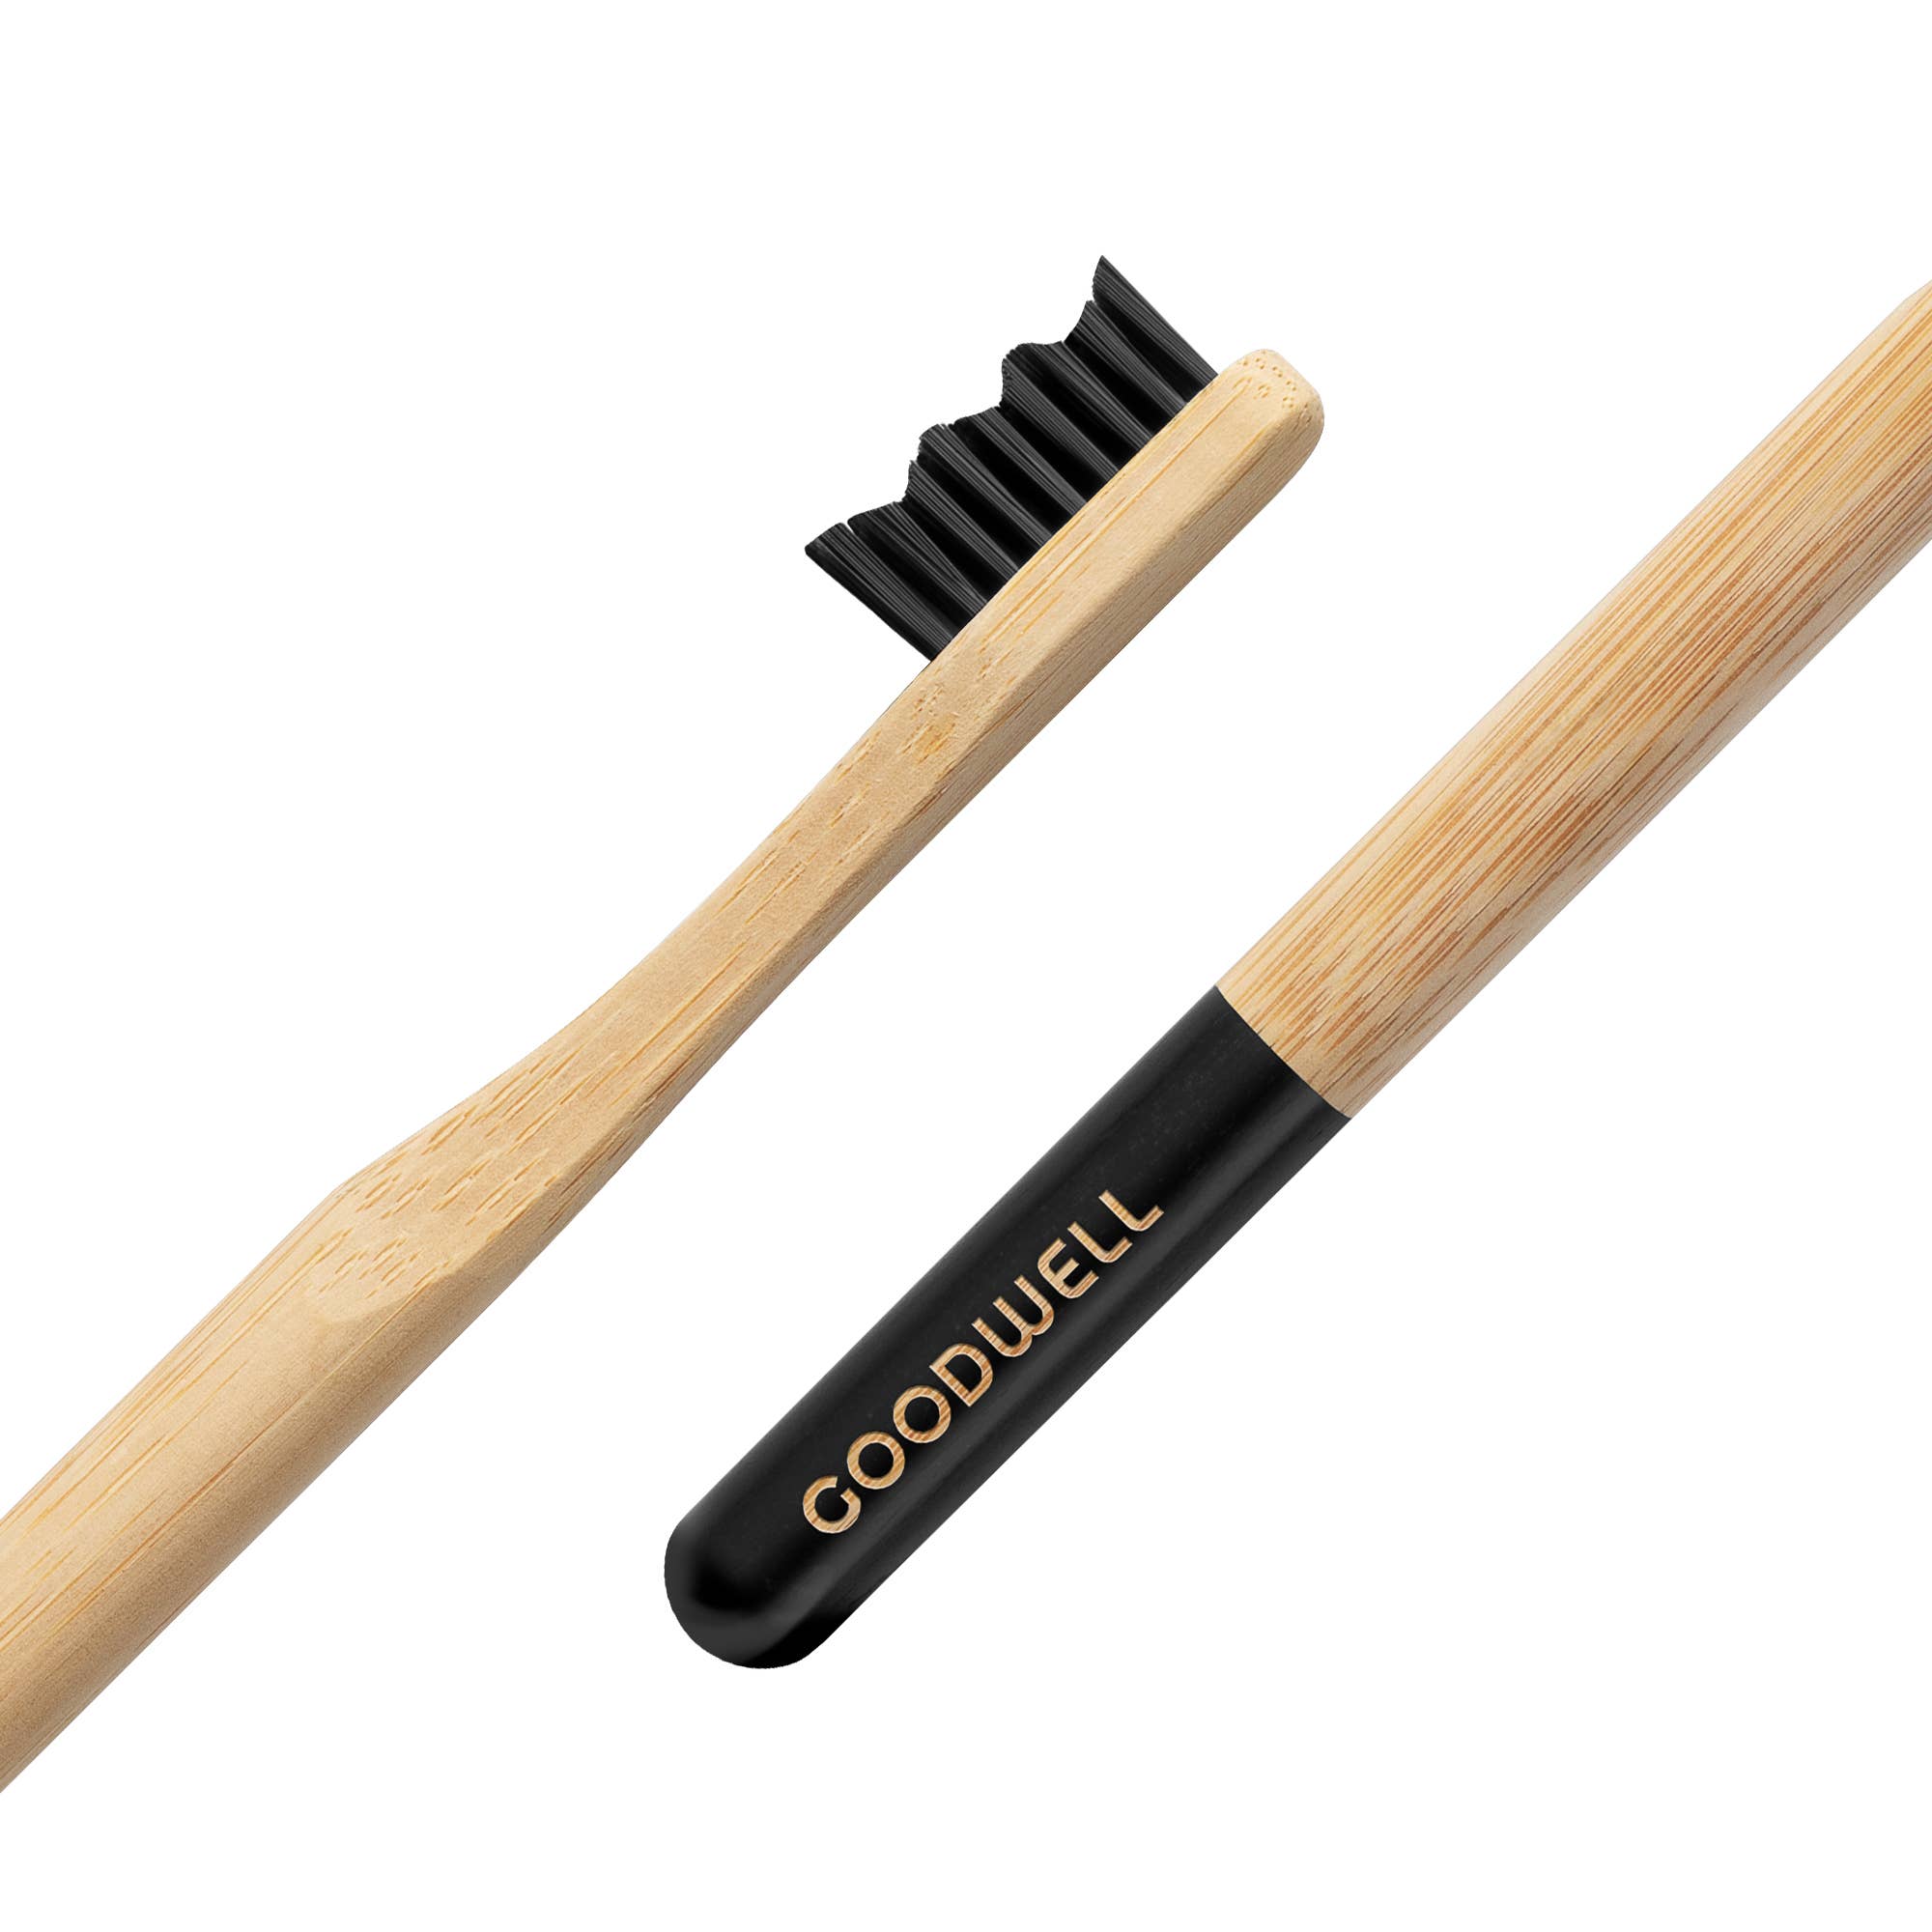 Goodwell Co. - Bamboo Toothbrush (Black)